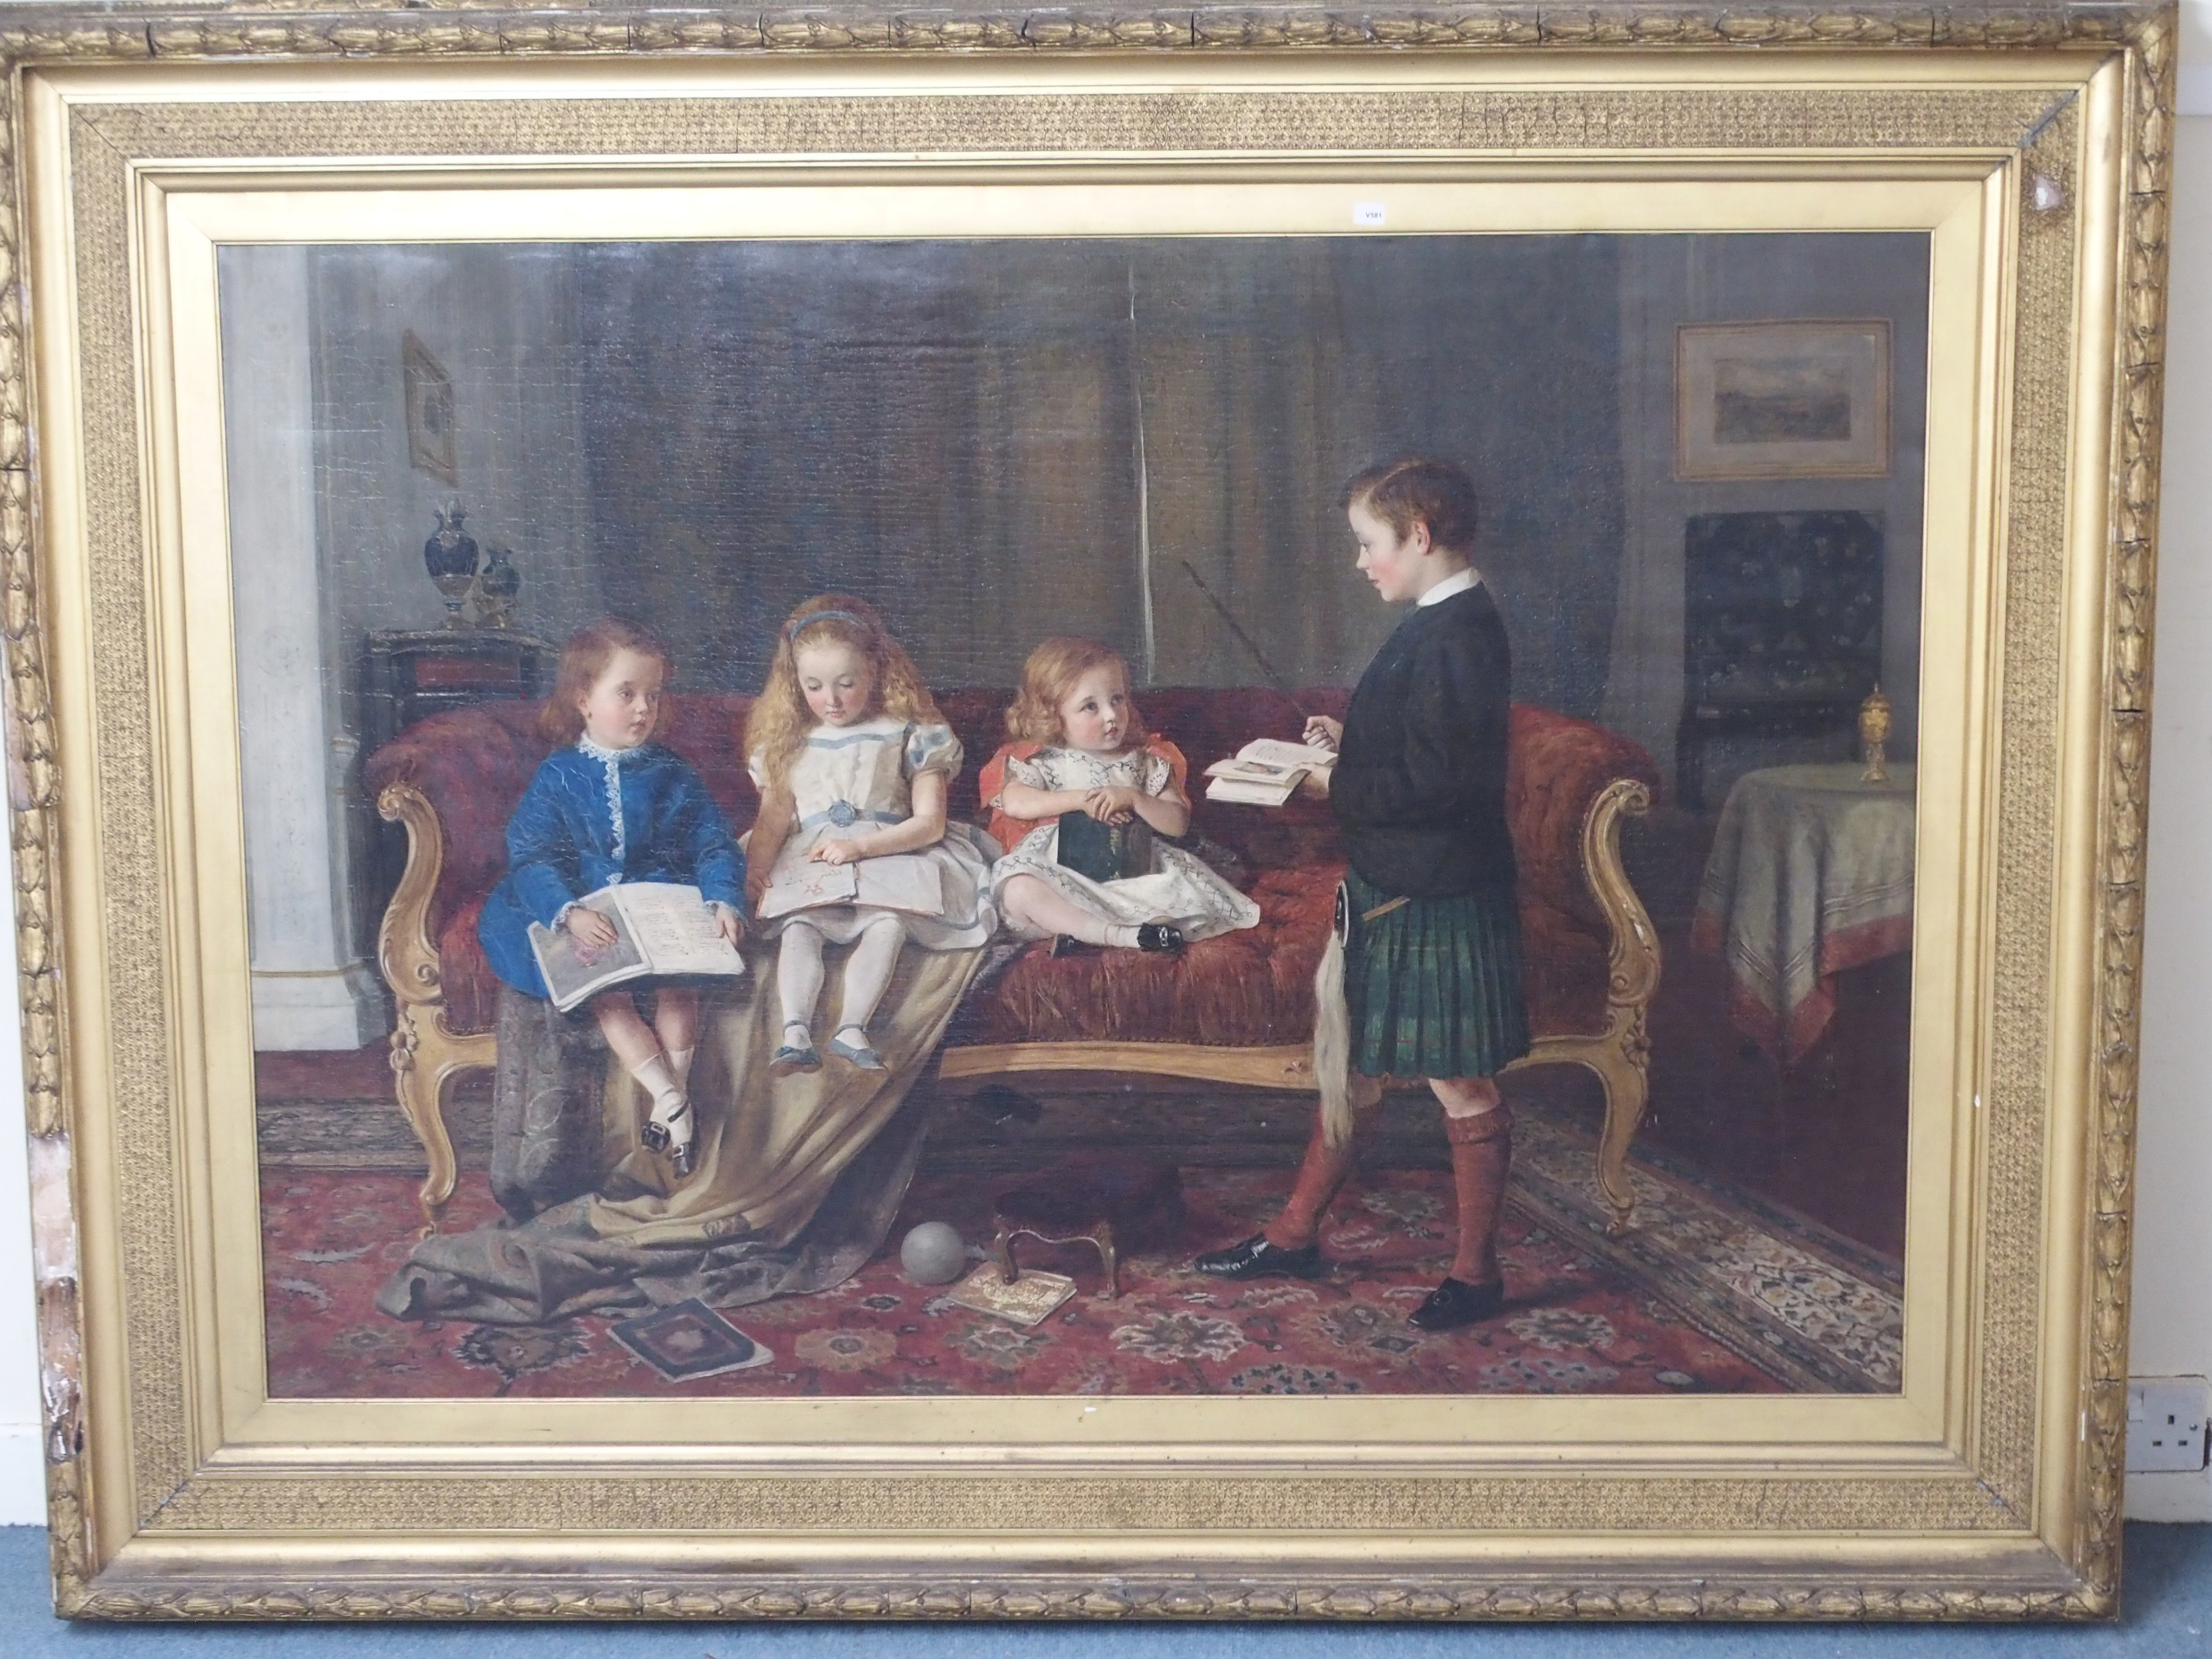 SCOTTISH SCHOOL (19TH CENTURY) THE LESSON C. 1882 Oil on canvas, 96.5 x 138cm (38 x 54 1/4") Group - Image 2 of 4